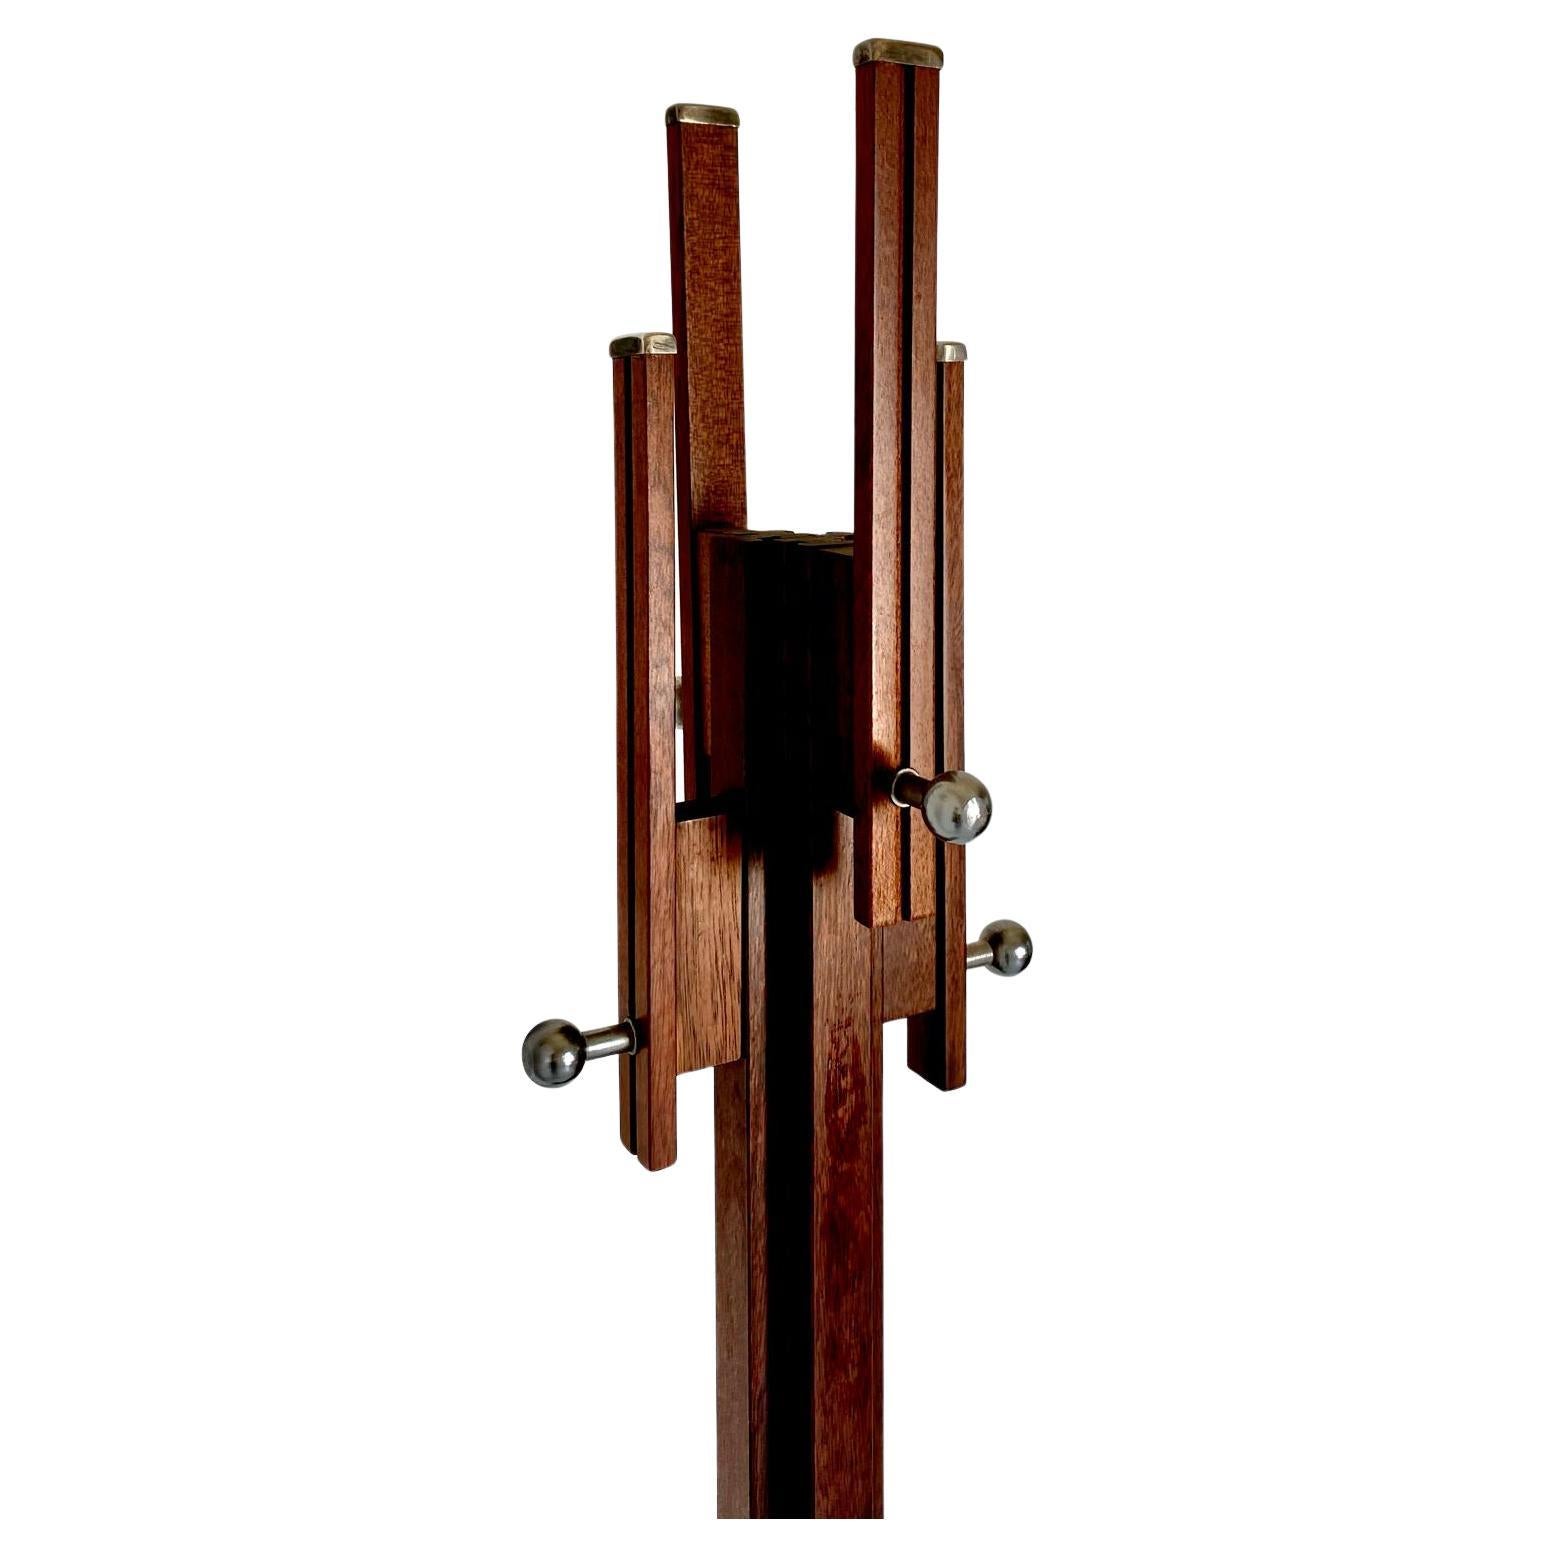 Carlo de Carli wood coat rack for FIARM, Italy, 1960's. 

Coat rack stand from the 1960s designed by Carlo de Carli for FIAM. Wood stem structure with chromed fittings. In very good conditions with only few signs of time. 

Please visit our profile